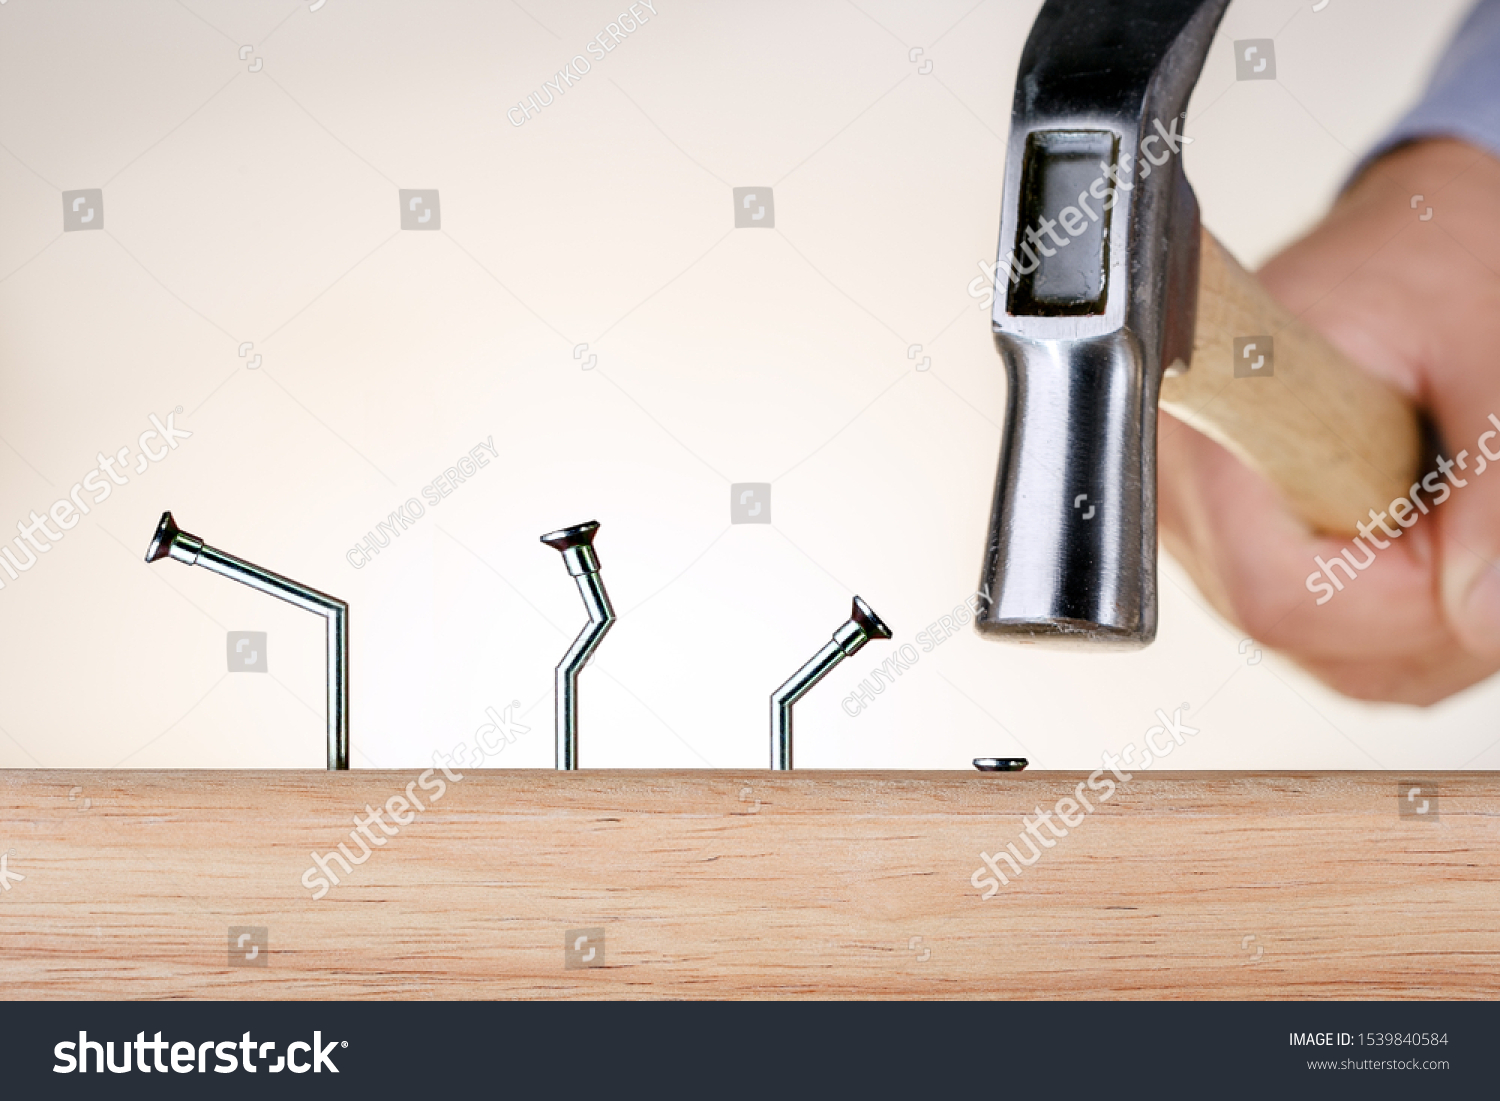 Learning from mistakes Businessman  hammering nails. Goal achievement. #1539840584